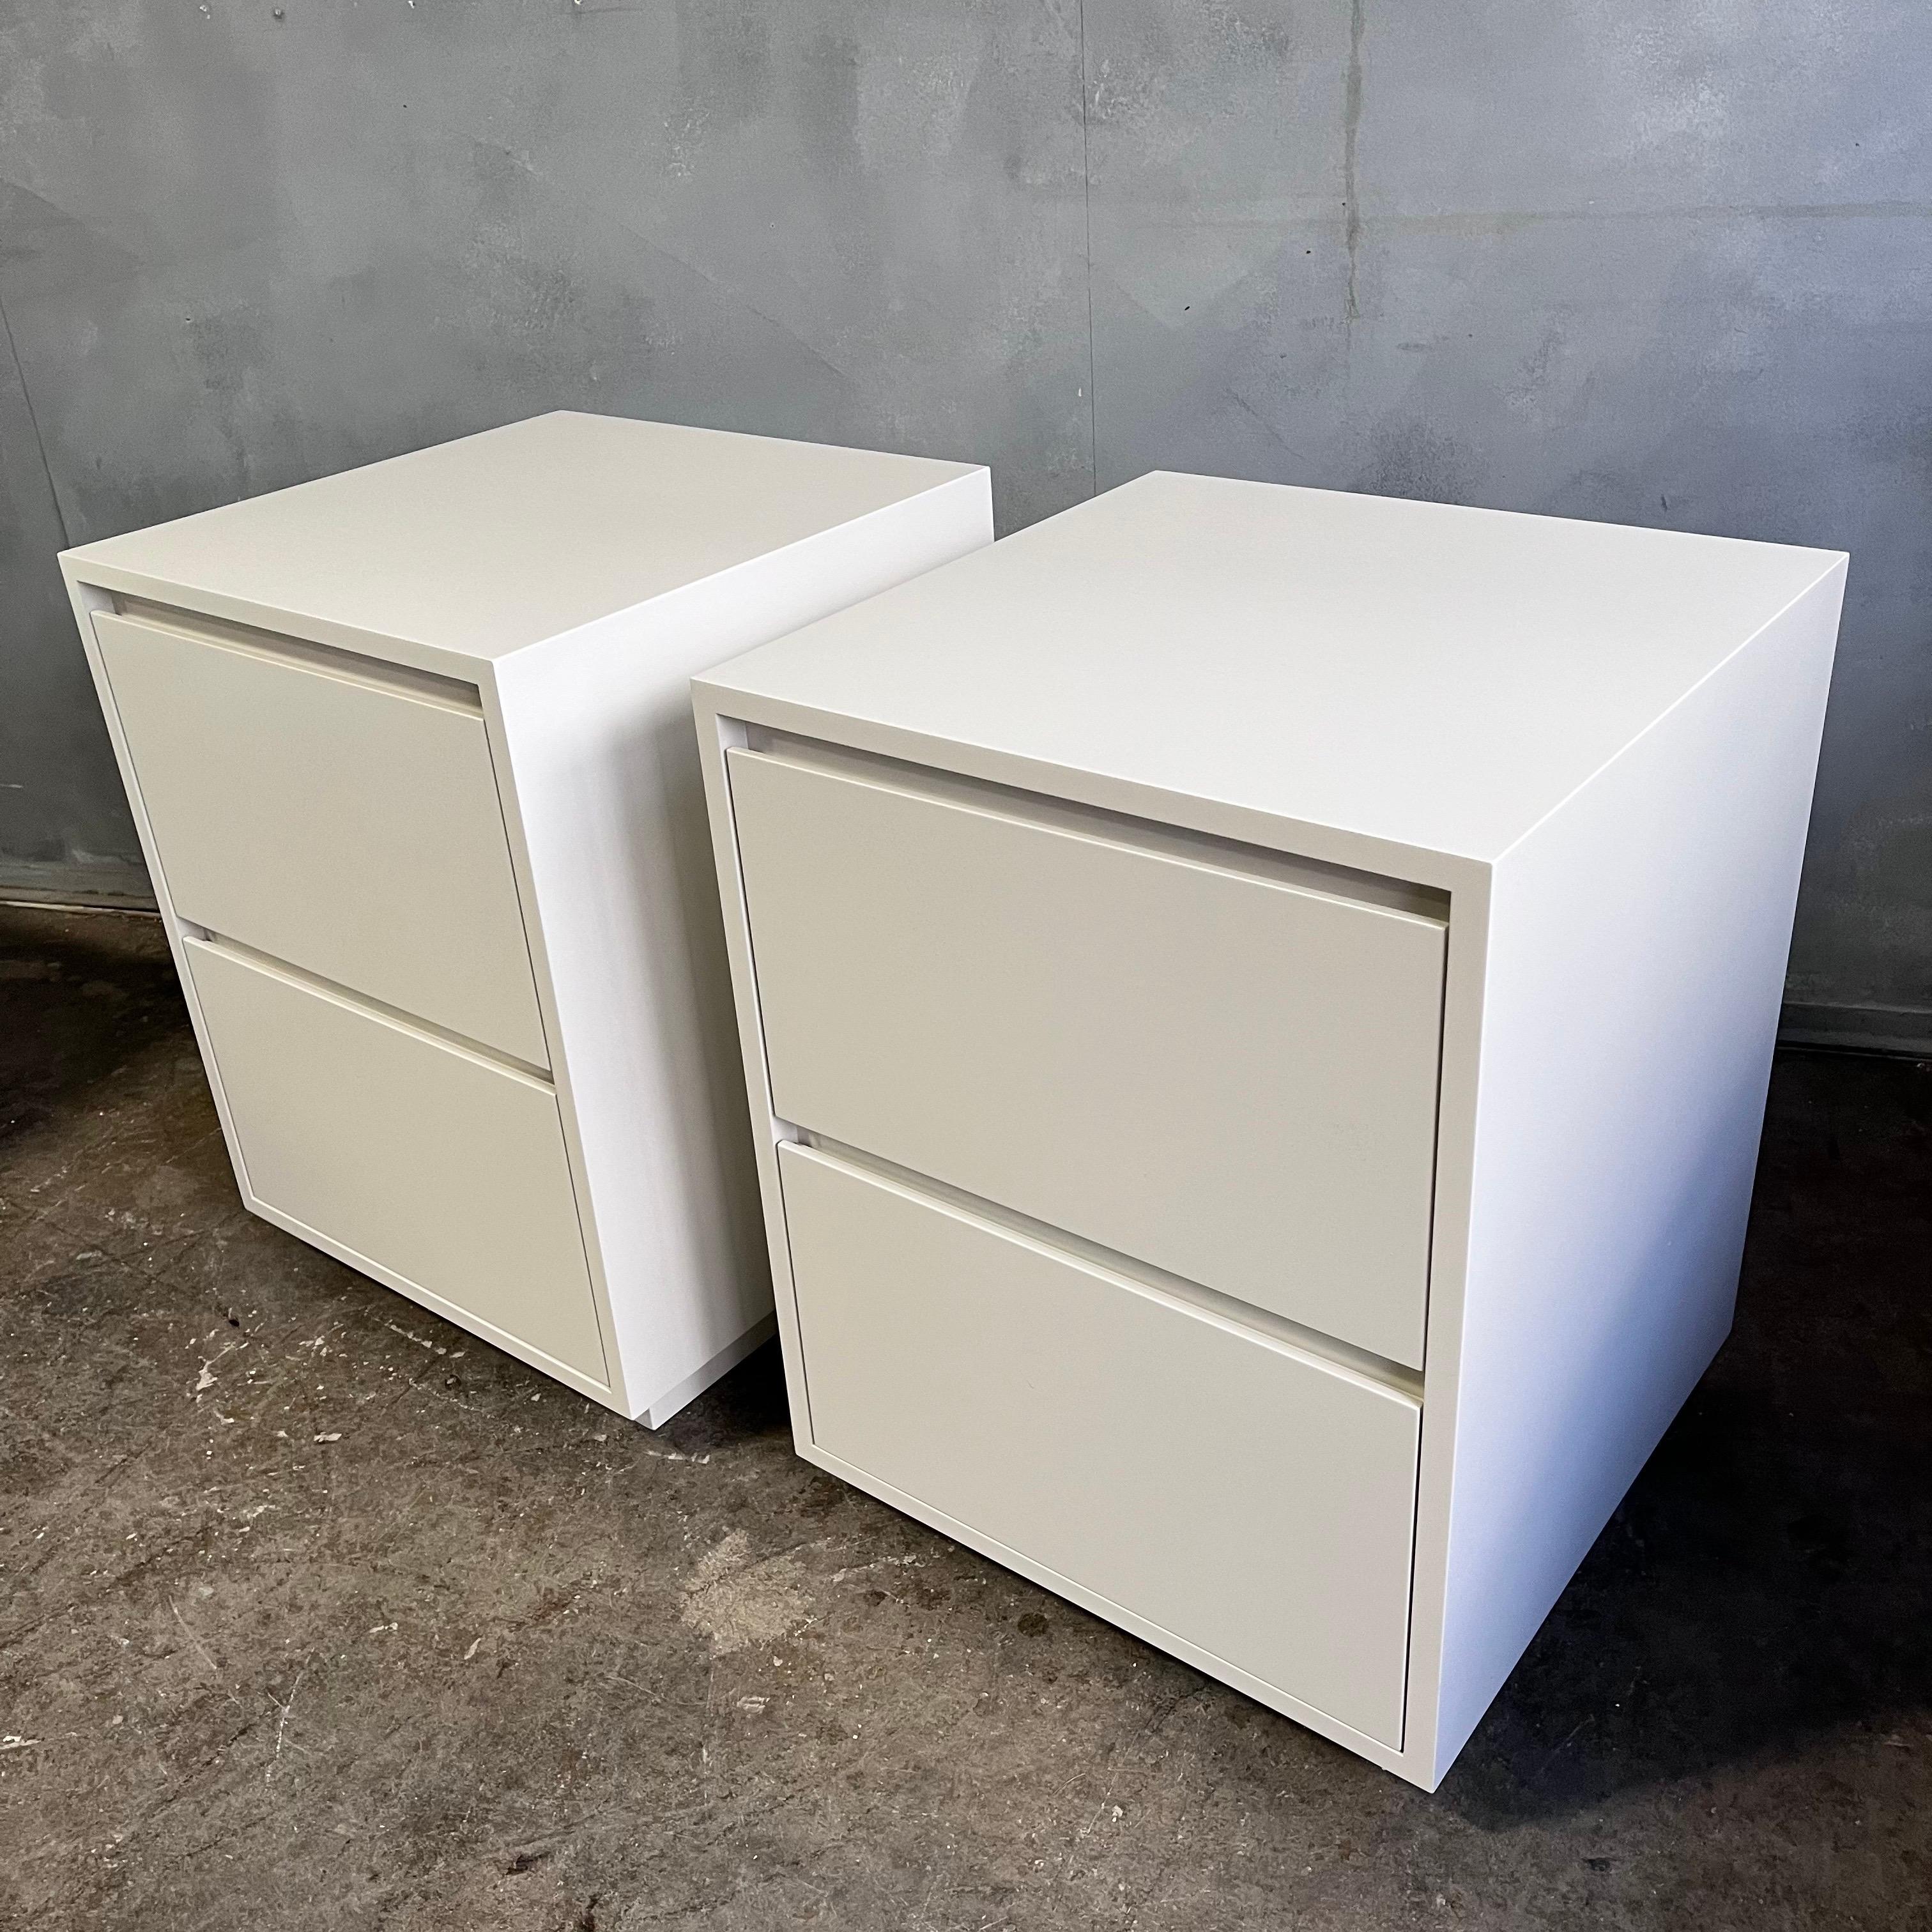 Minimalist 1980's Off-White Taupe Satin Lacquer Night Stands 2